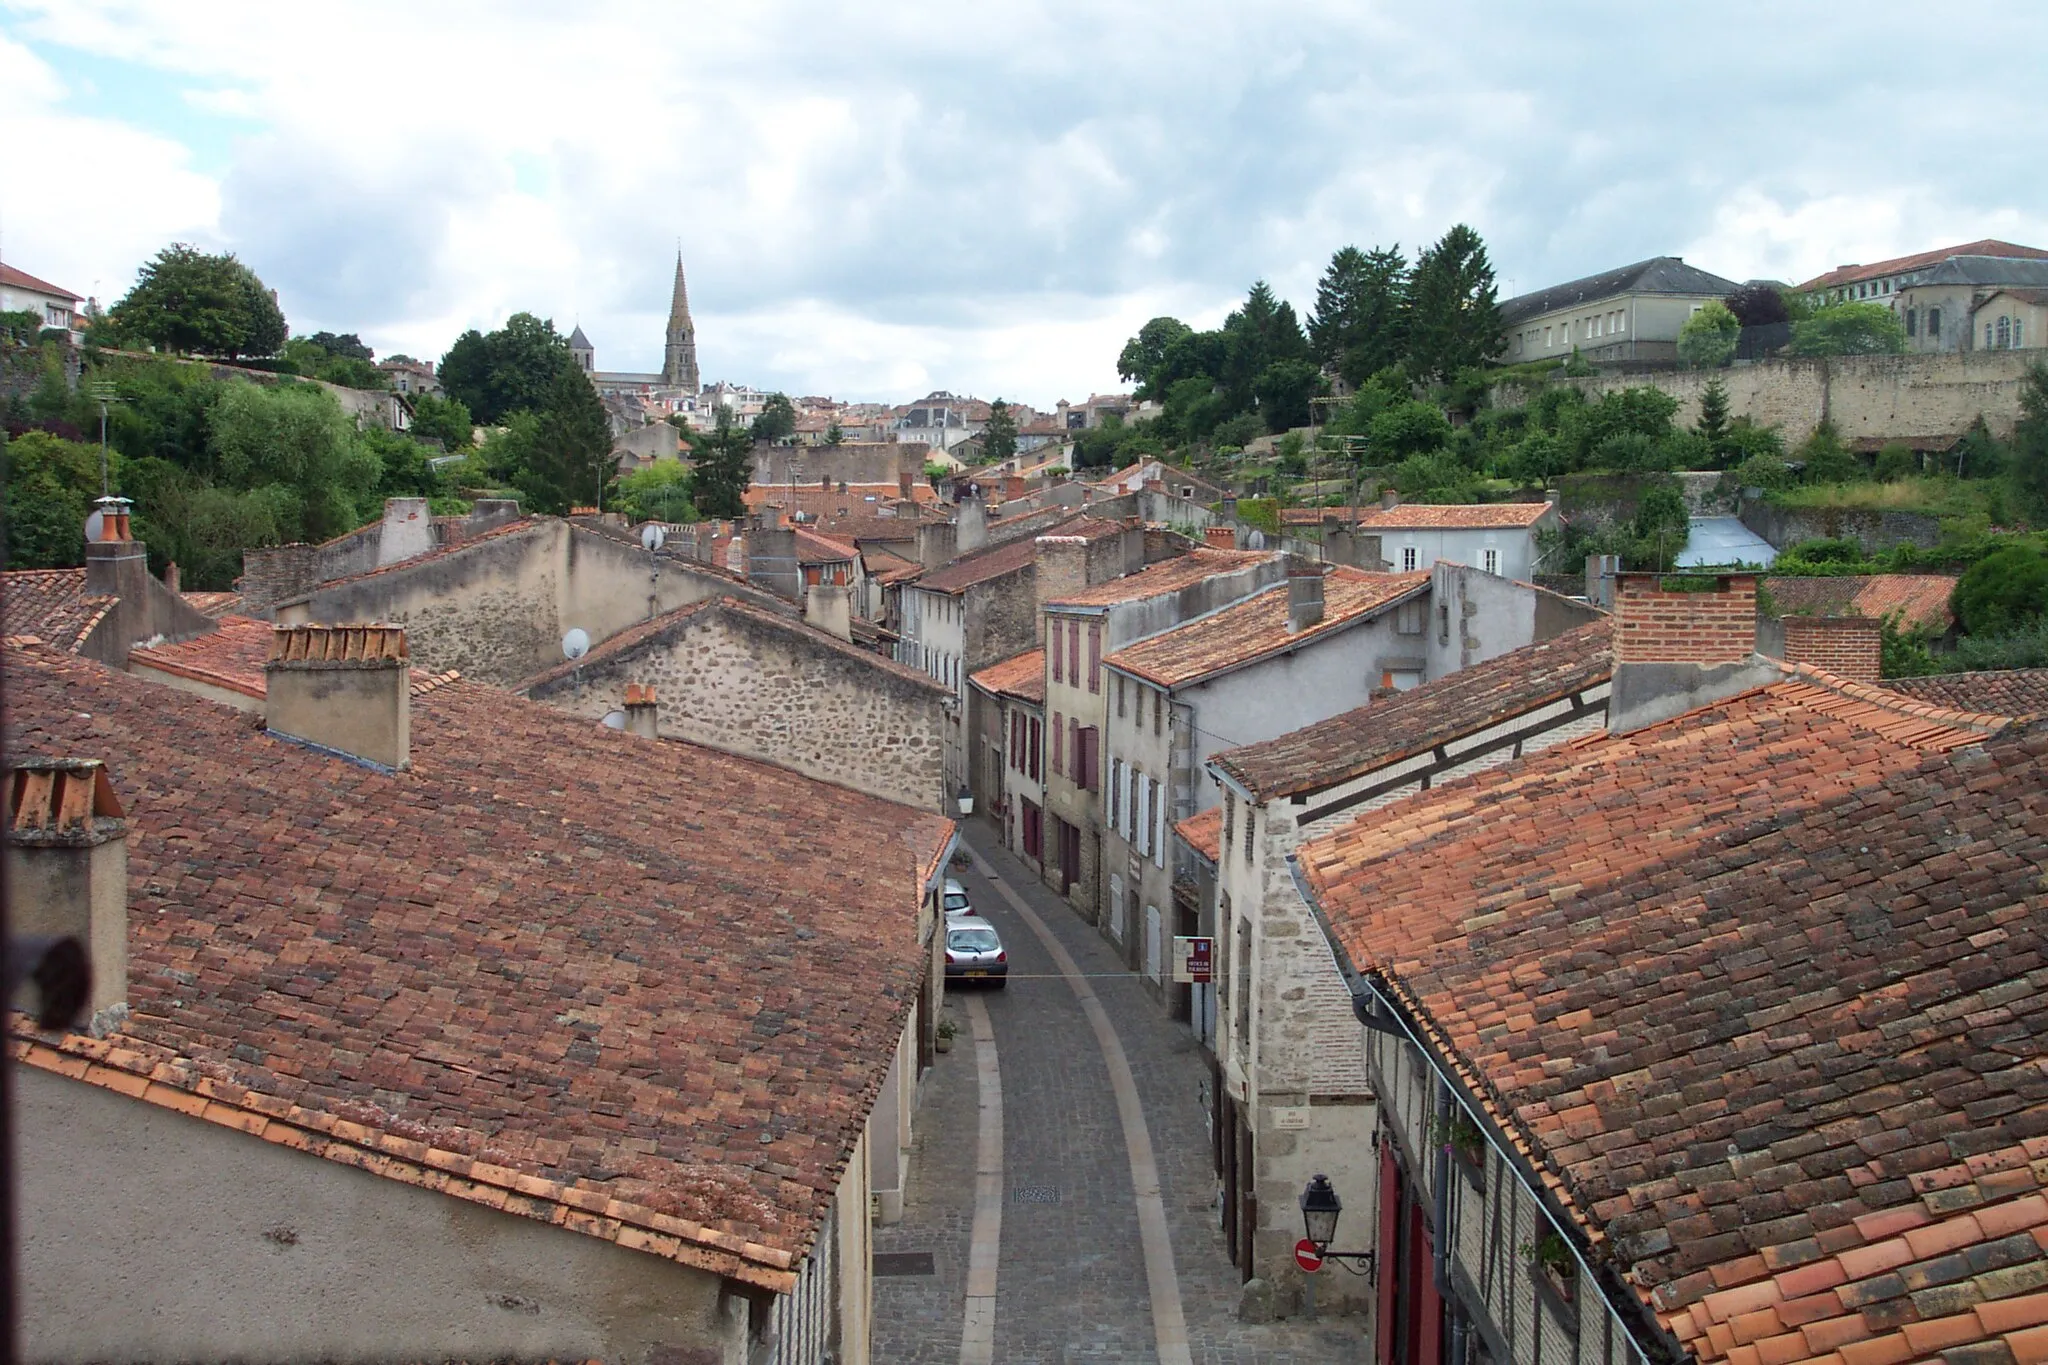 Photo showing: The Rue de la Vau Saint-Jacques in Parthenay, photographed from the upper chamber of the Saint-Jacques Gate, and looking up the hill to the town centre. The eastern wall of the citadel can be seen to the upper right. For more information, see the Wikipedia article Parthenay.